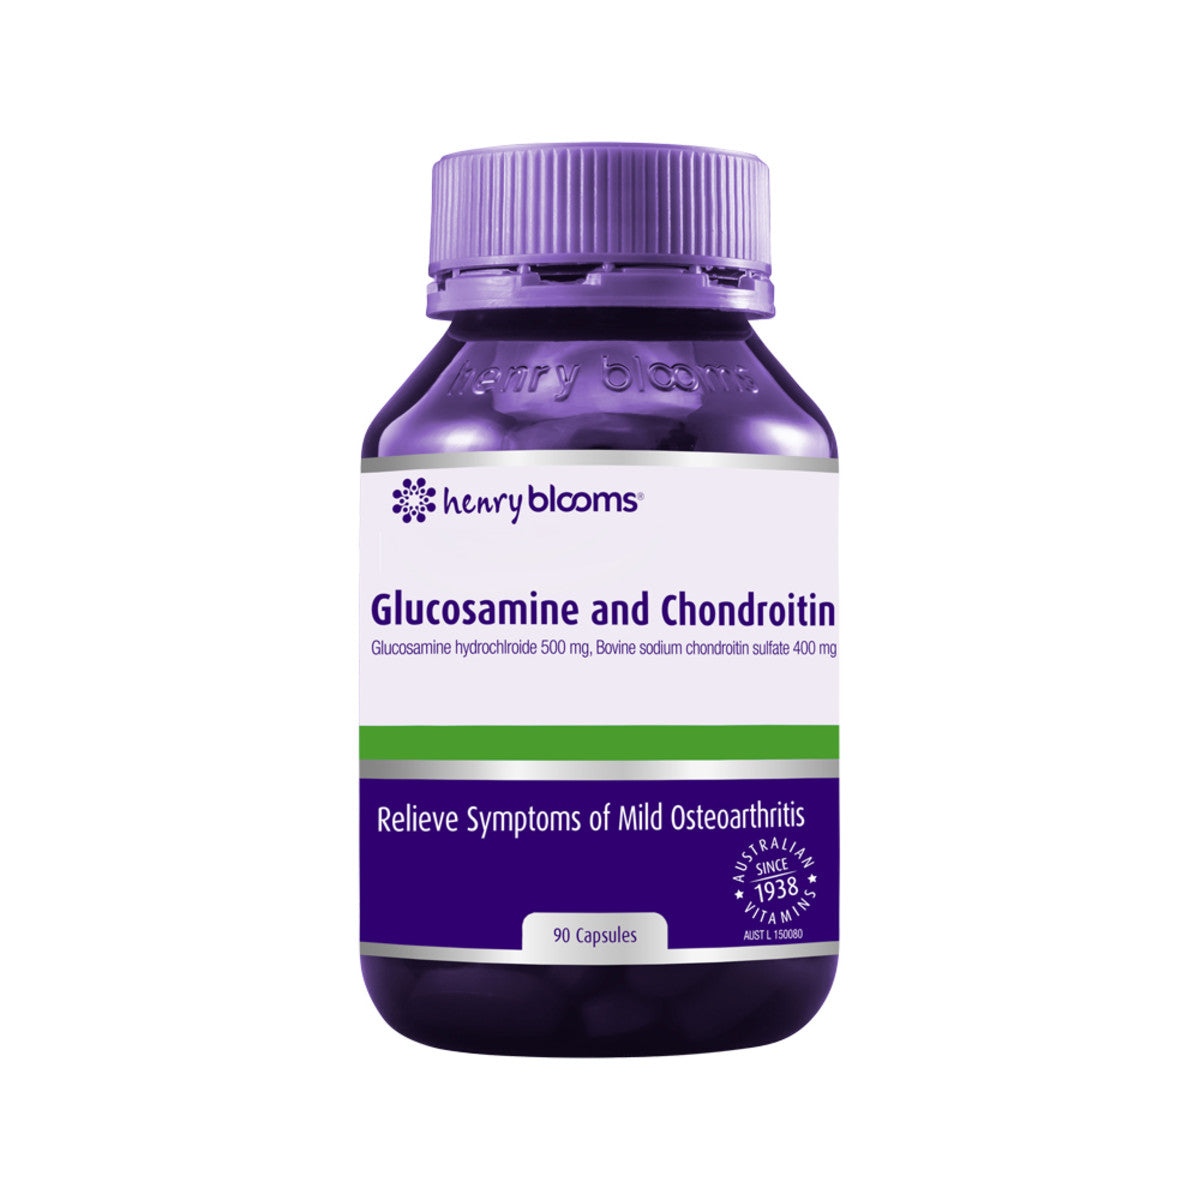 Henry Blooms - Glucosamine and Chondroitin